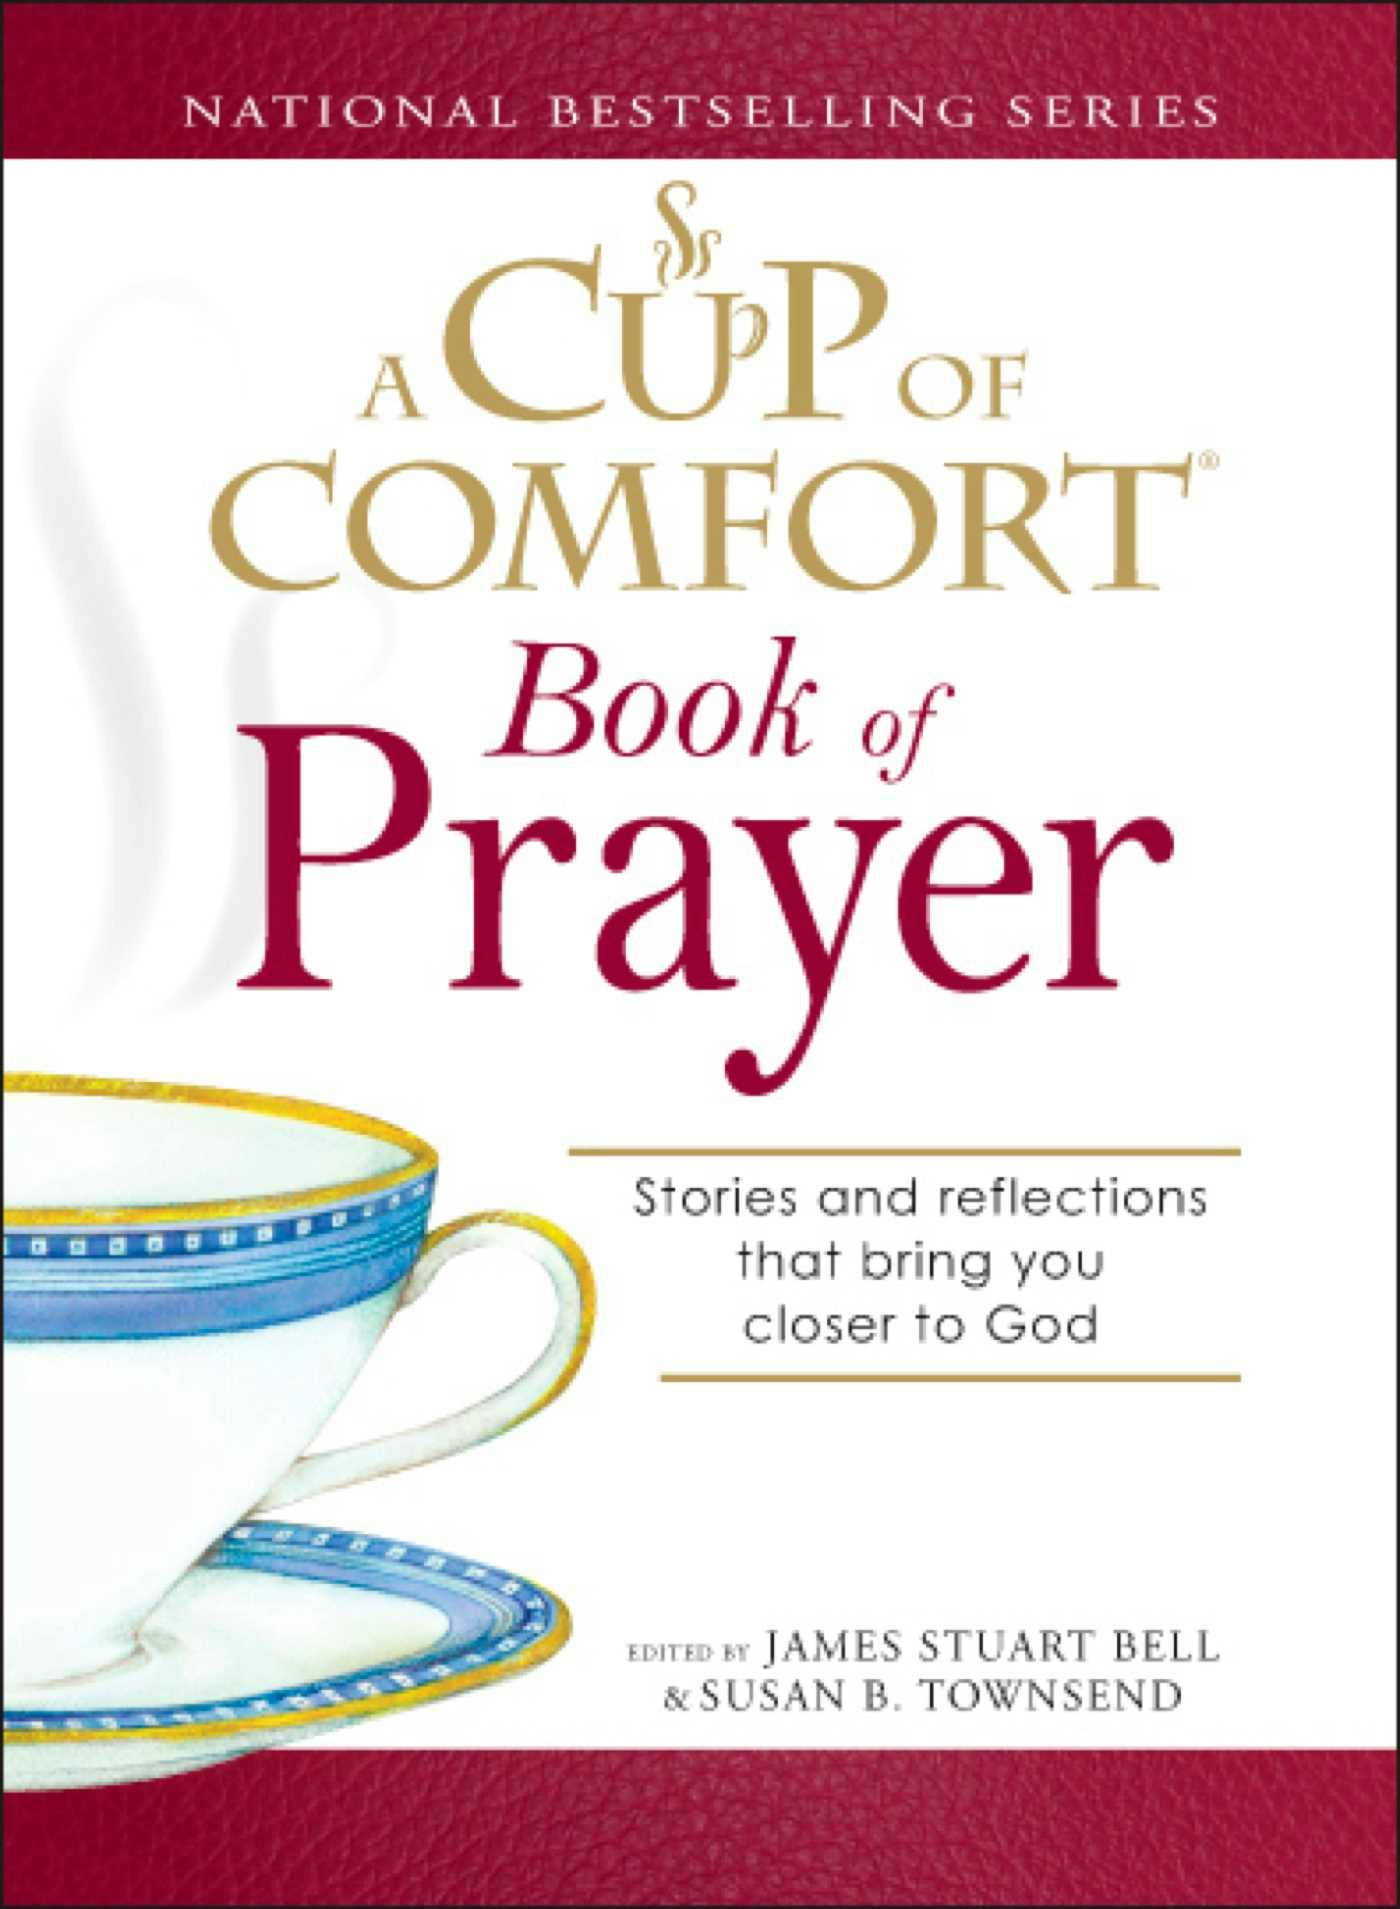 A Cup of Comfort Book of Prayer: Stories and reflections that bring you closer to God - undefined